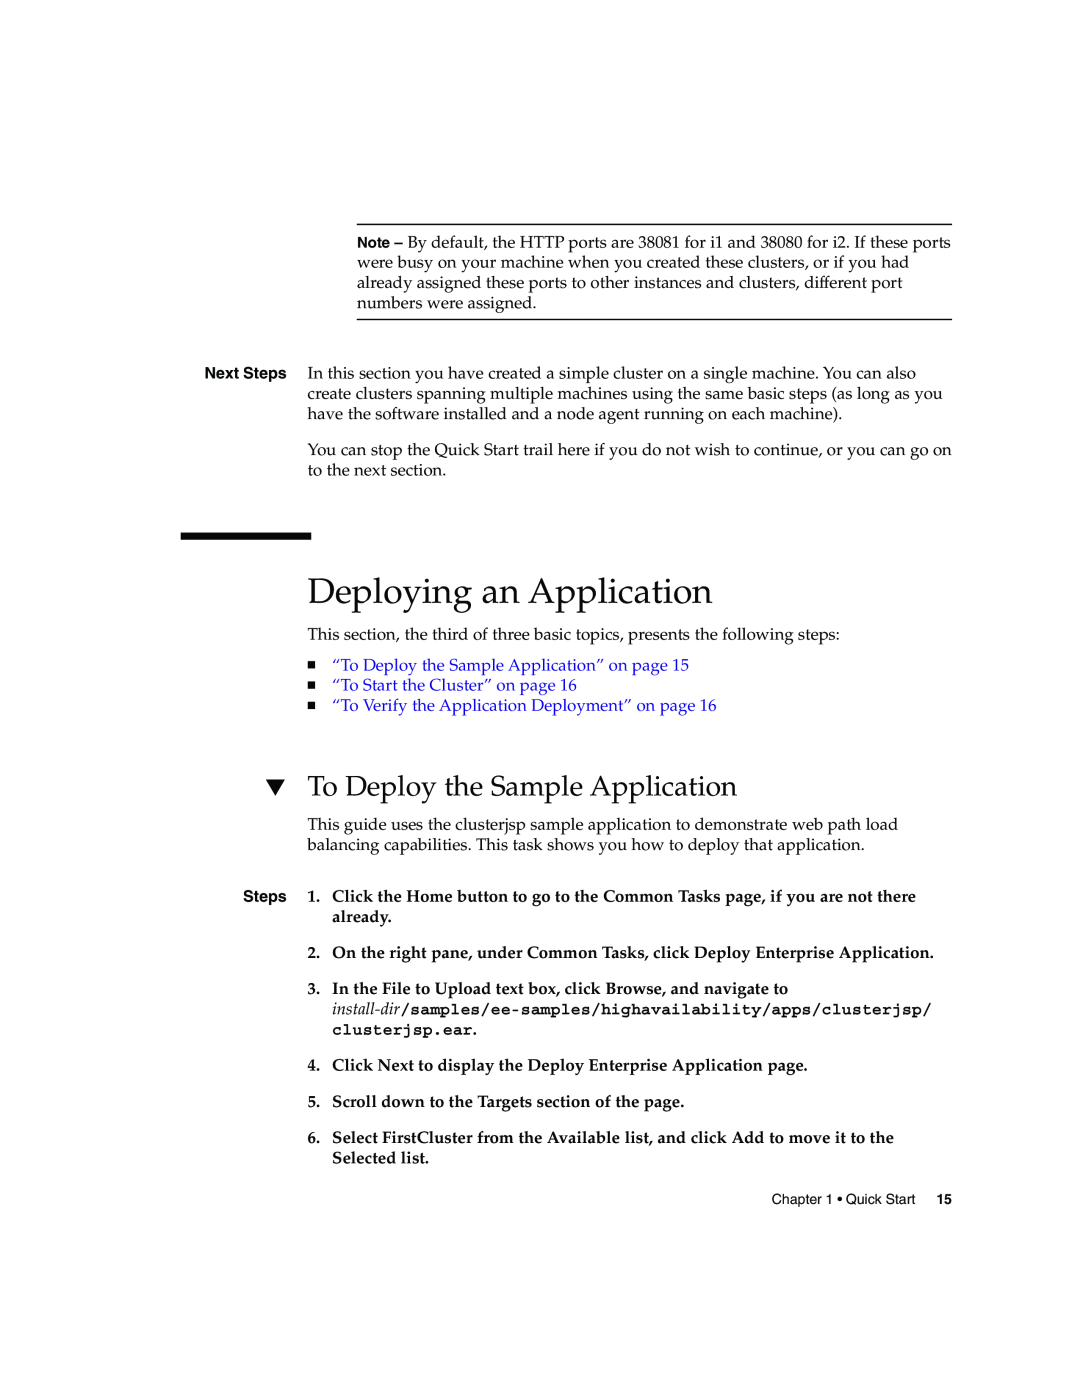 Sun Microsystems 2005Q2 Deploying an Application, To Deploy the Sample Application, “To Start the Cluster” on page 